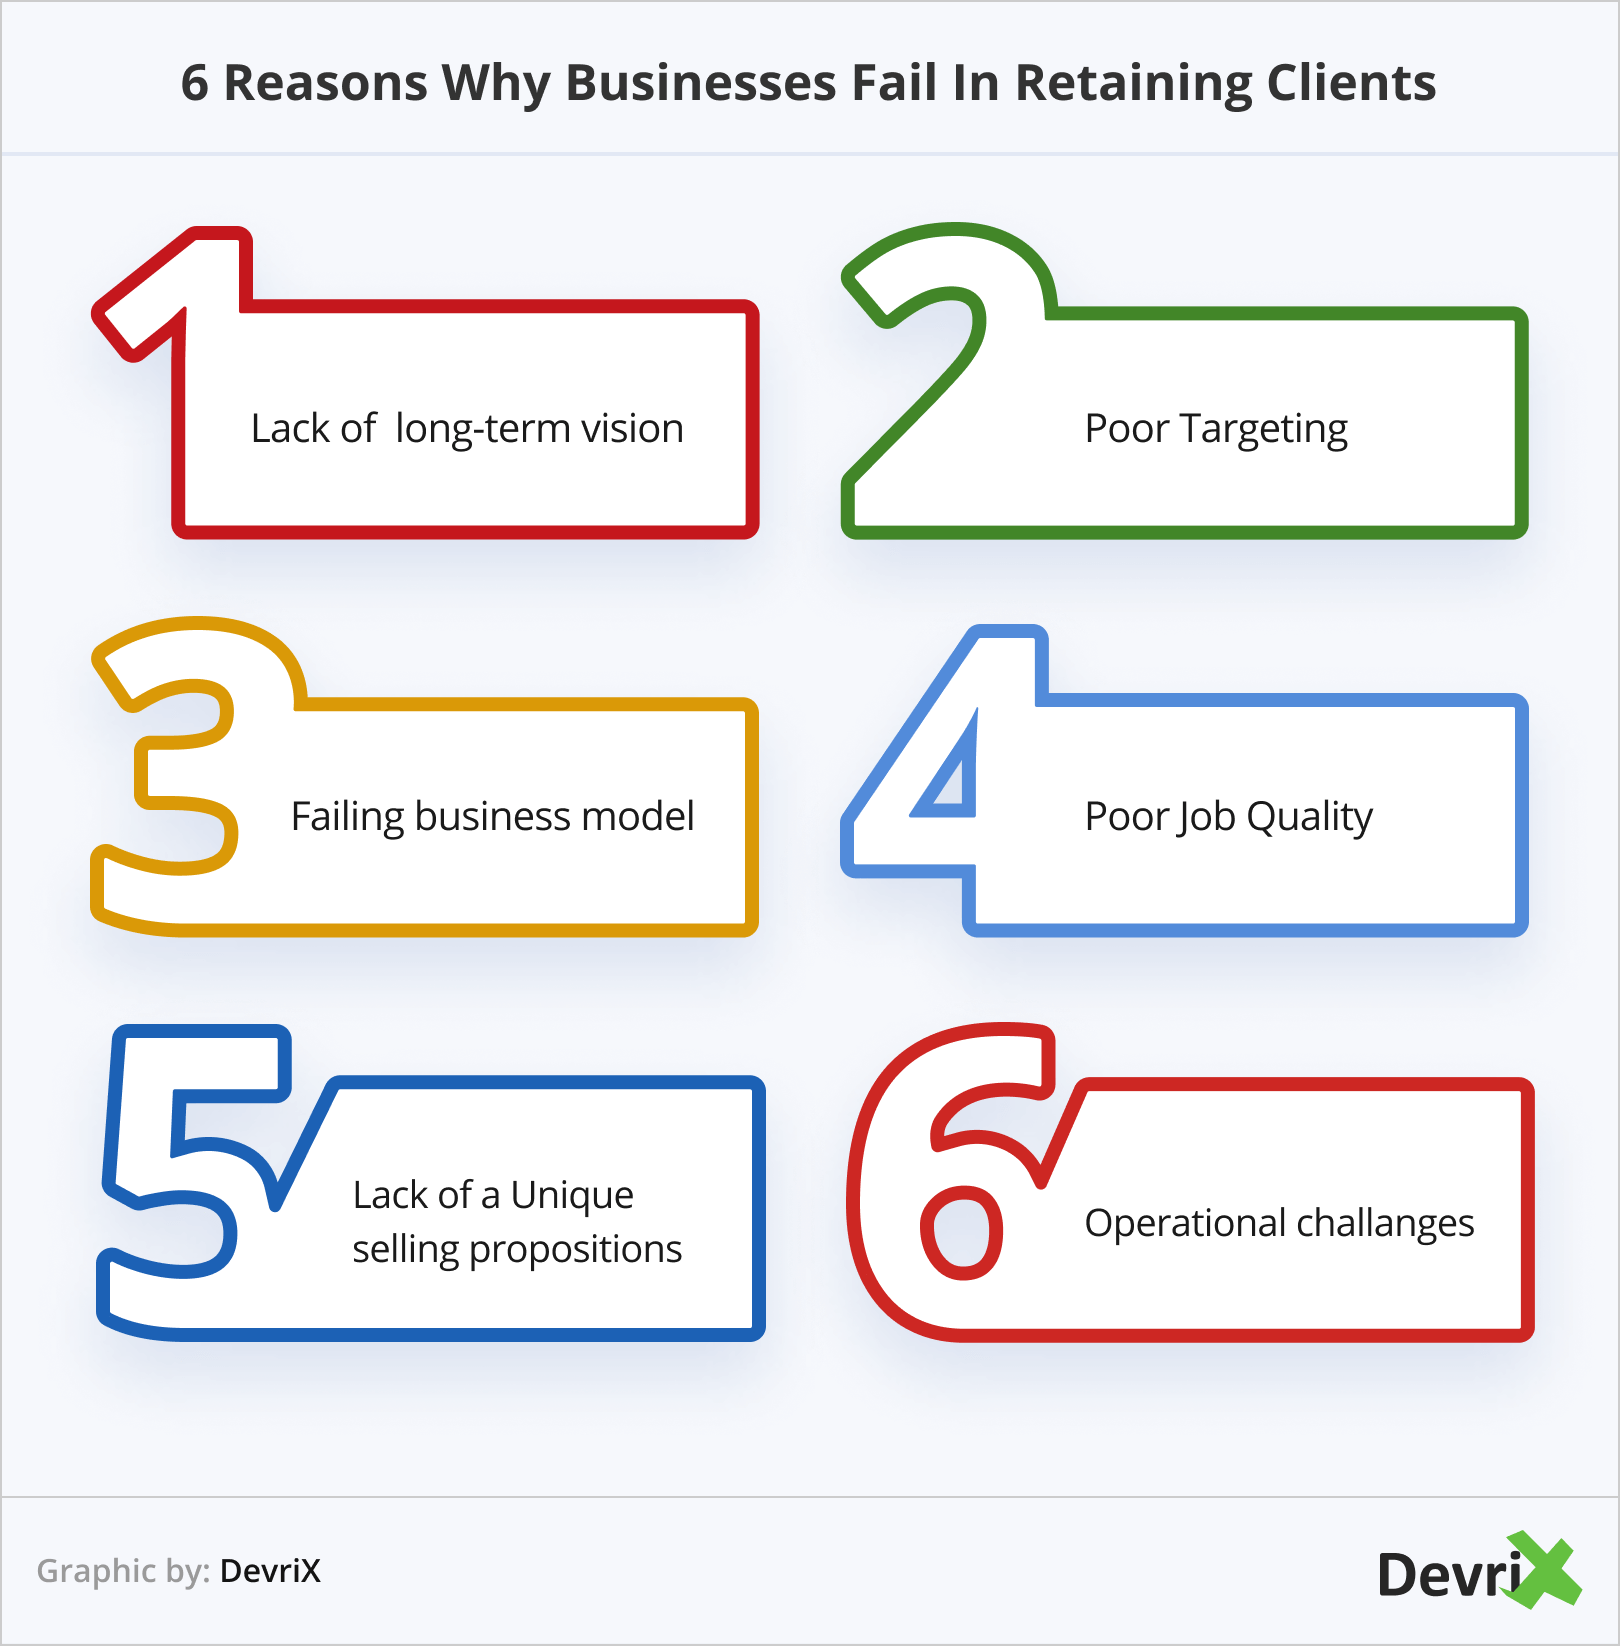 6 Reasons Why Businesses Fail In Retaining Clients